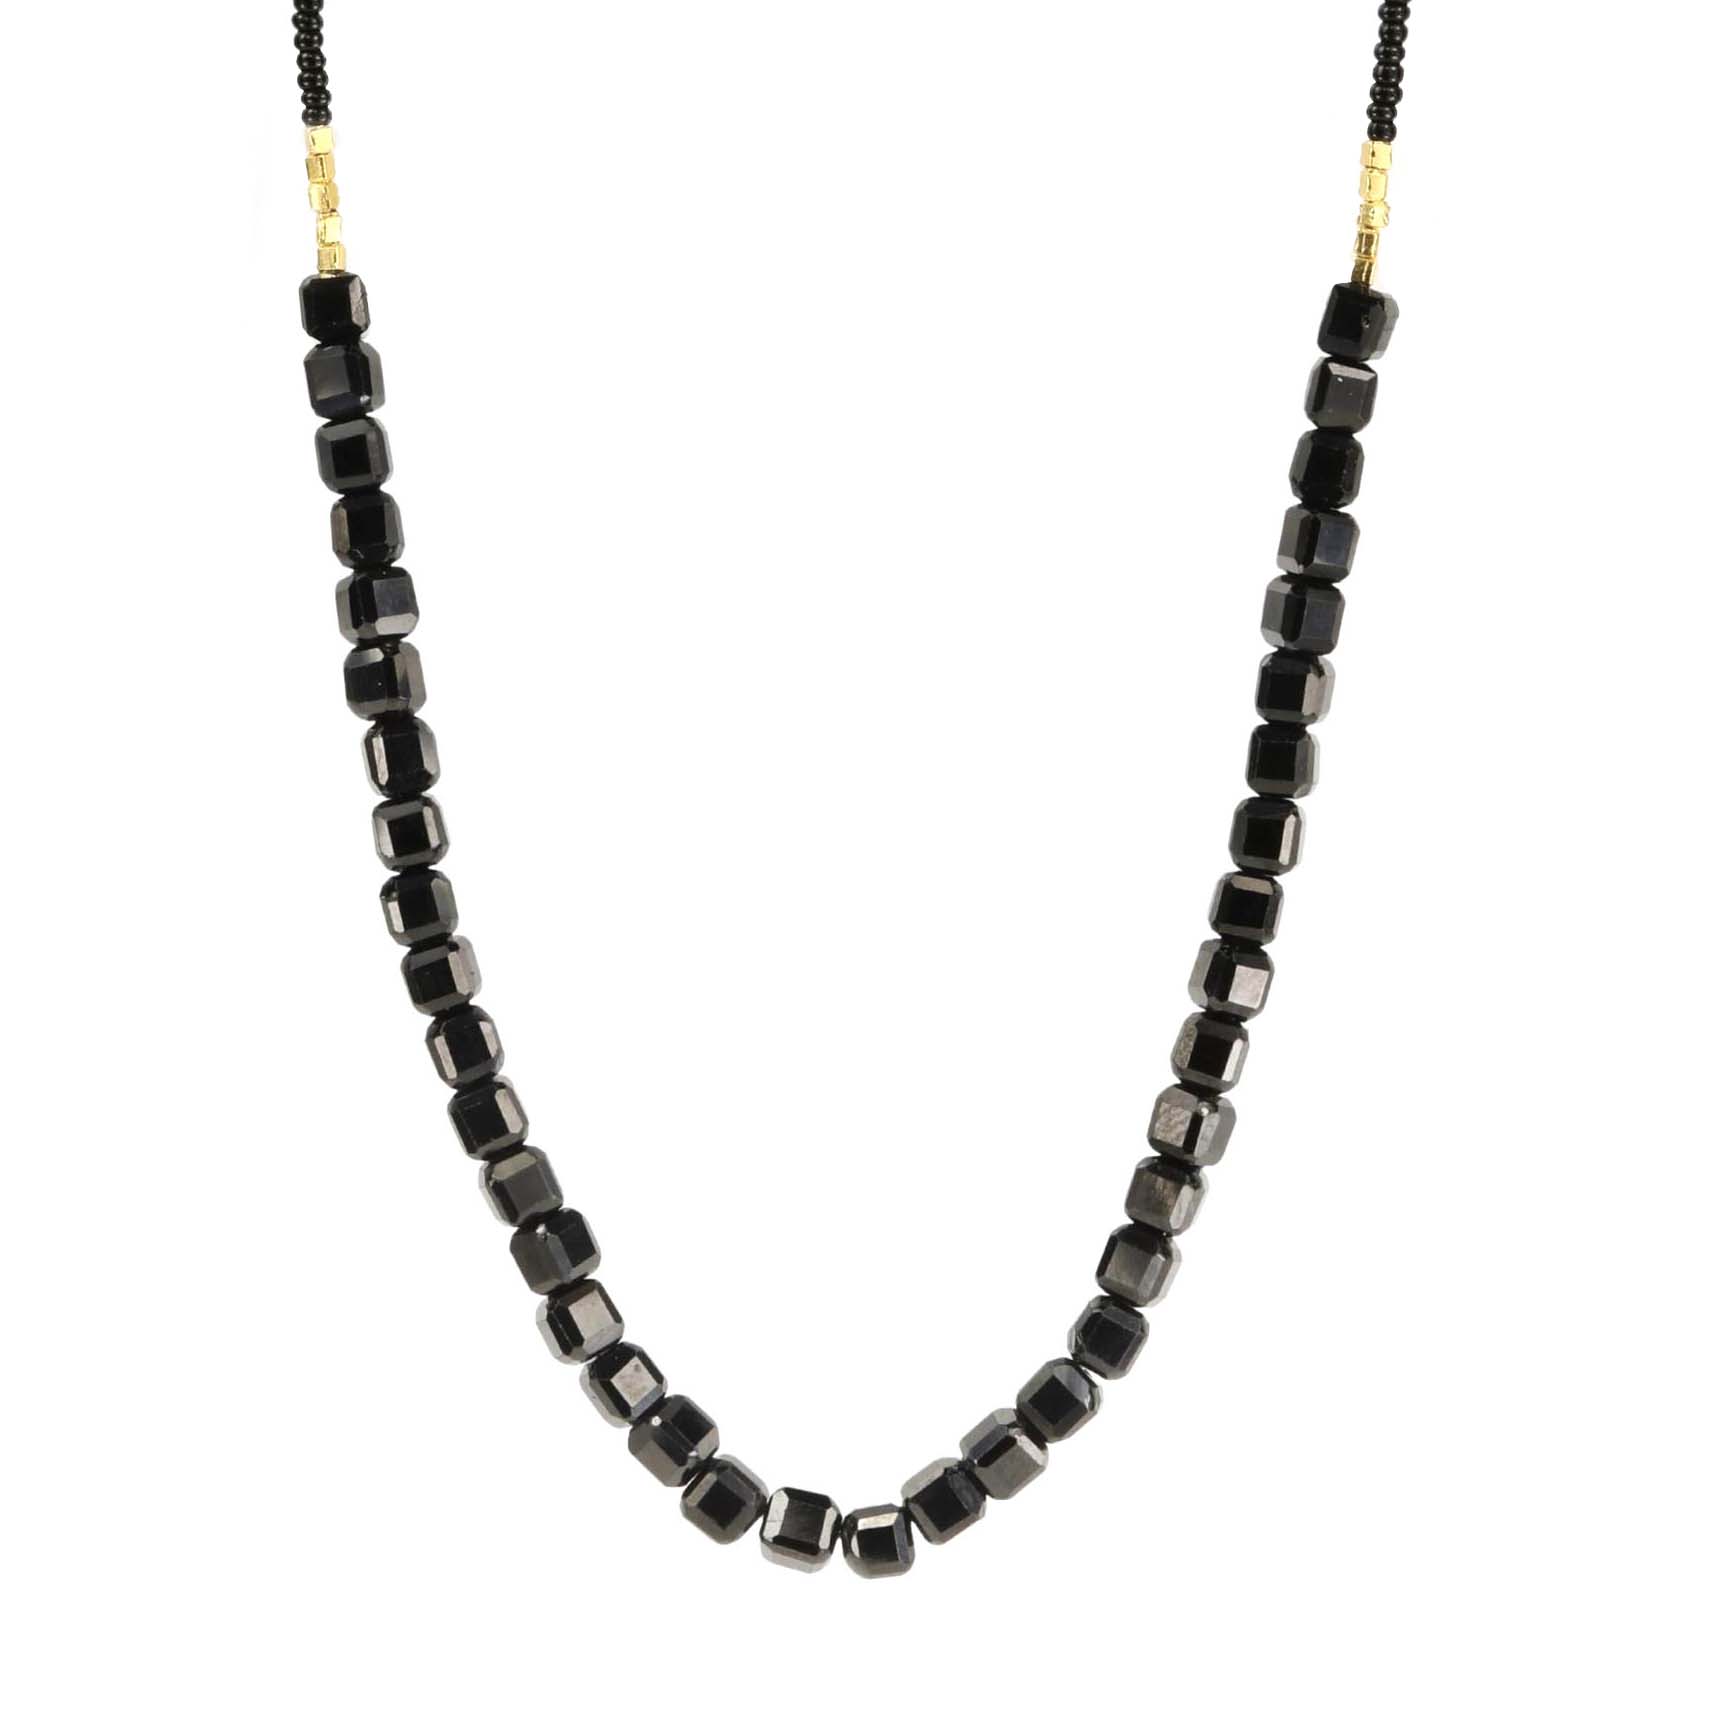 Black Seed Necklace with Gold Vermeil and Black Onyx Beads in Center